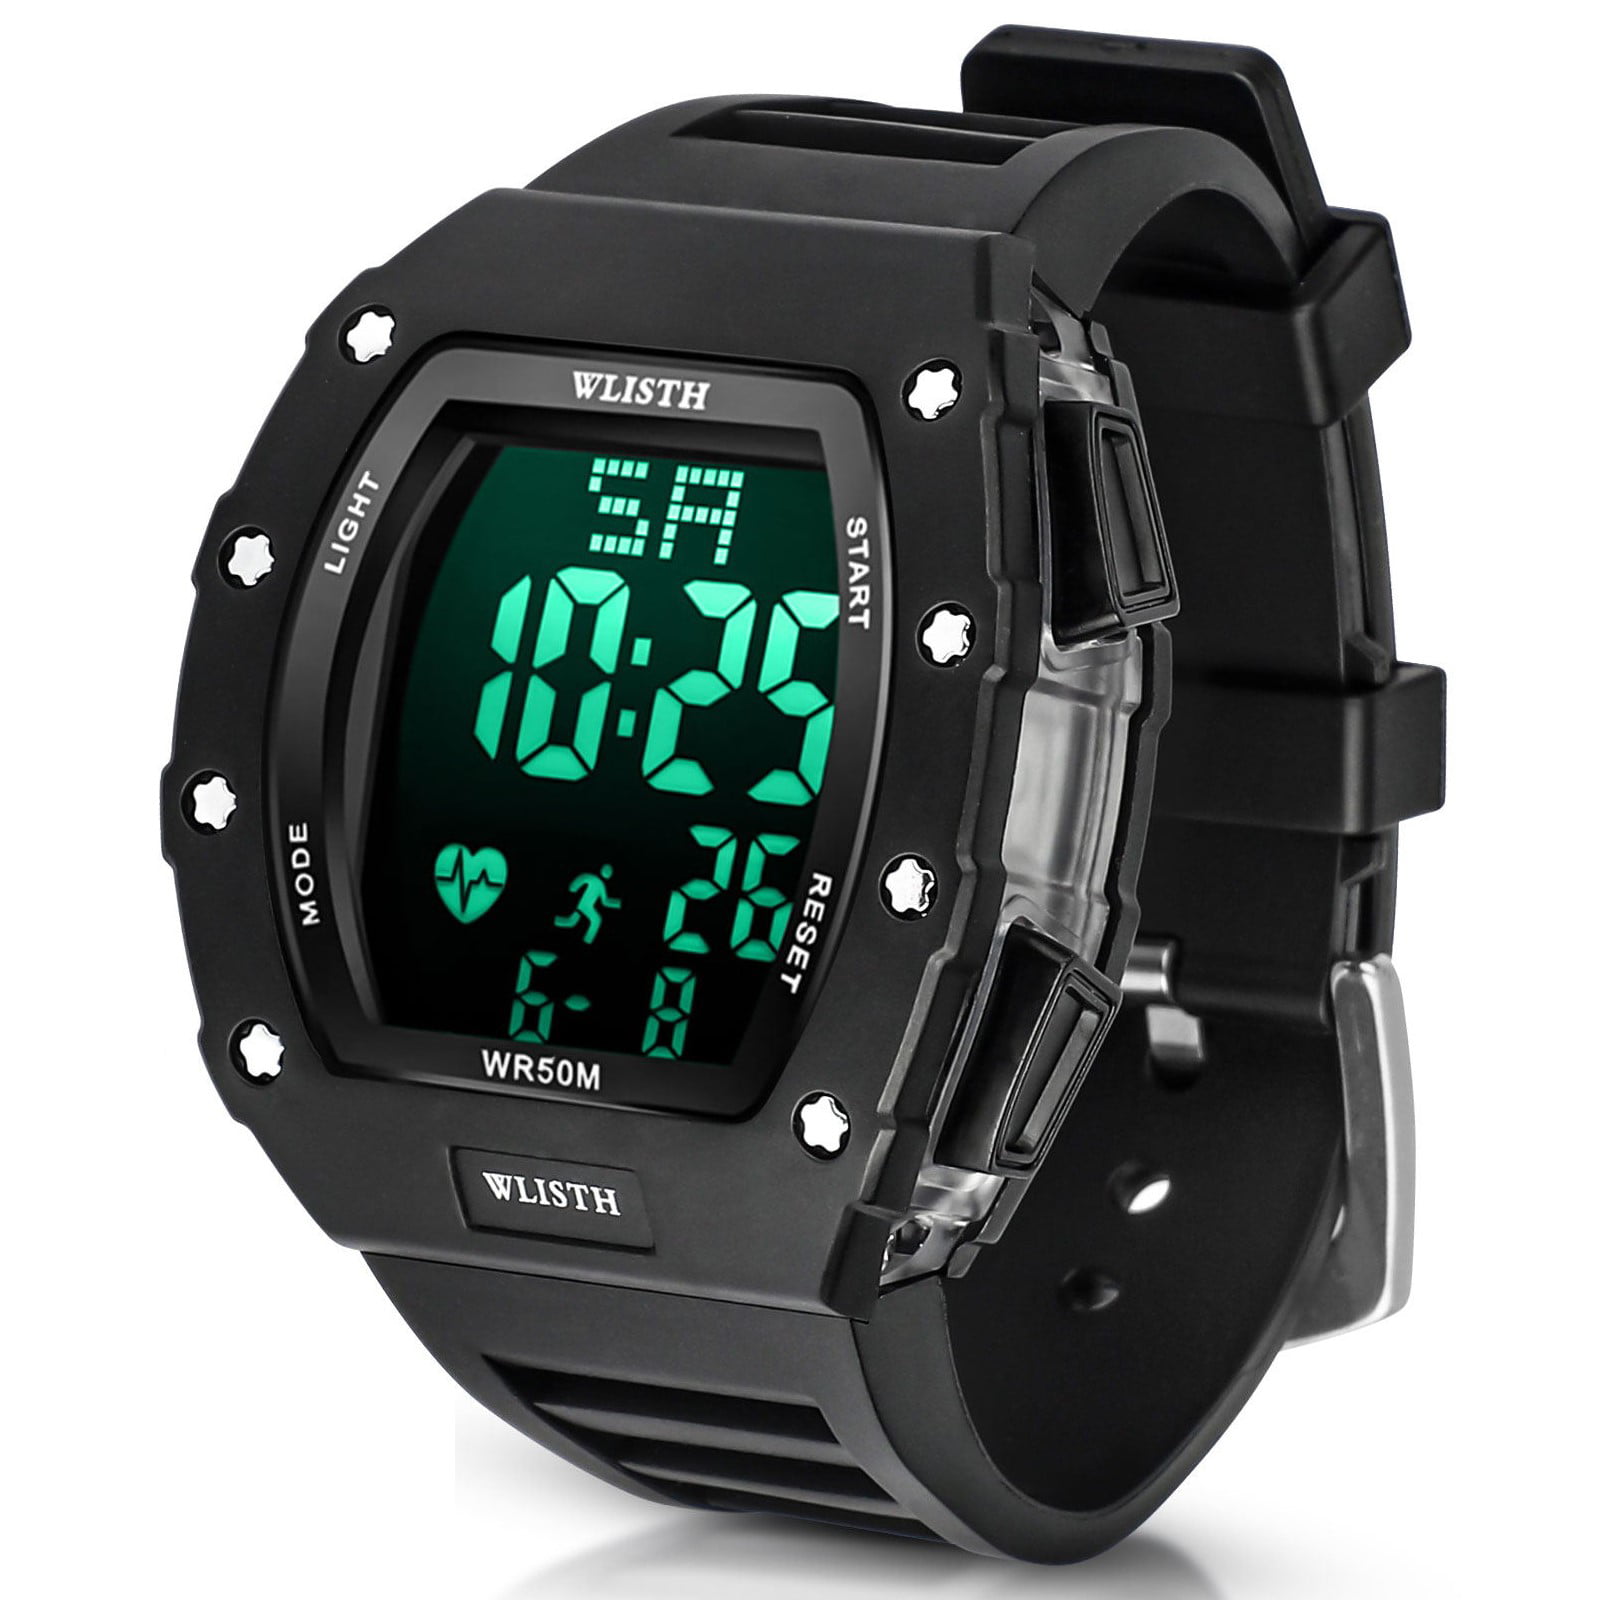 Eeekit Mens Digital Watch Led Military 50m Waterproof Sports Watches For Men Electronic Hand